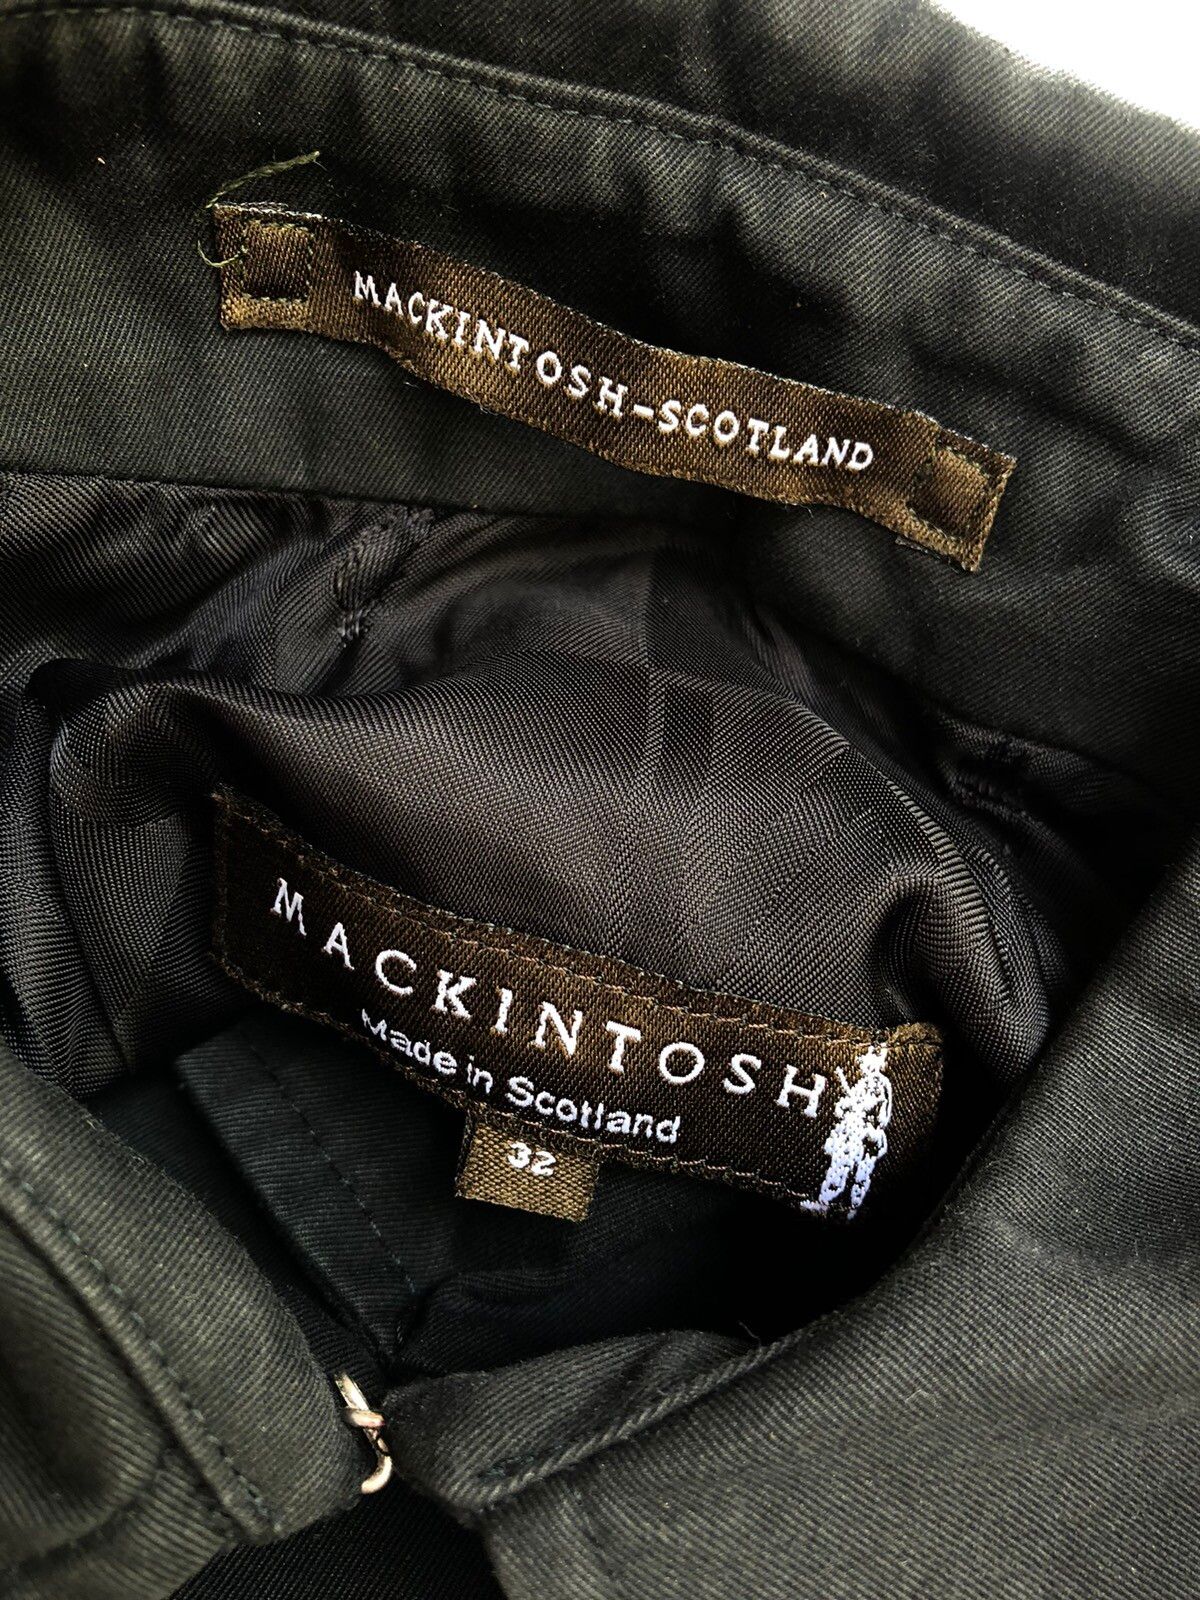 MACKINTOSH BELTED TRENCH COAT 32 - 9